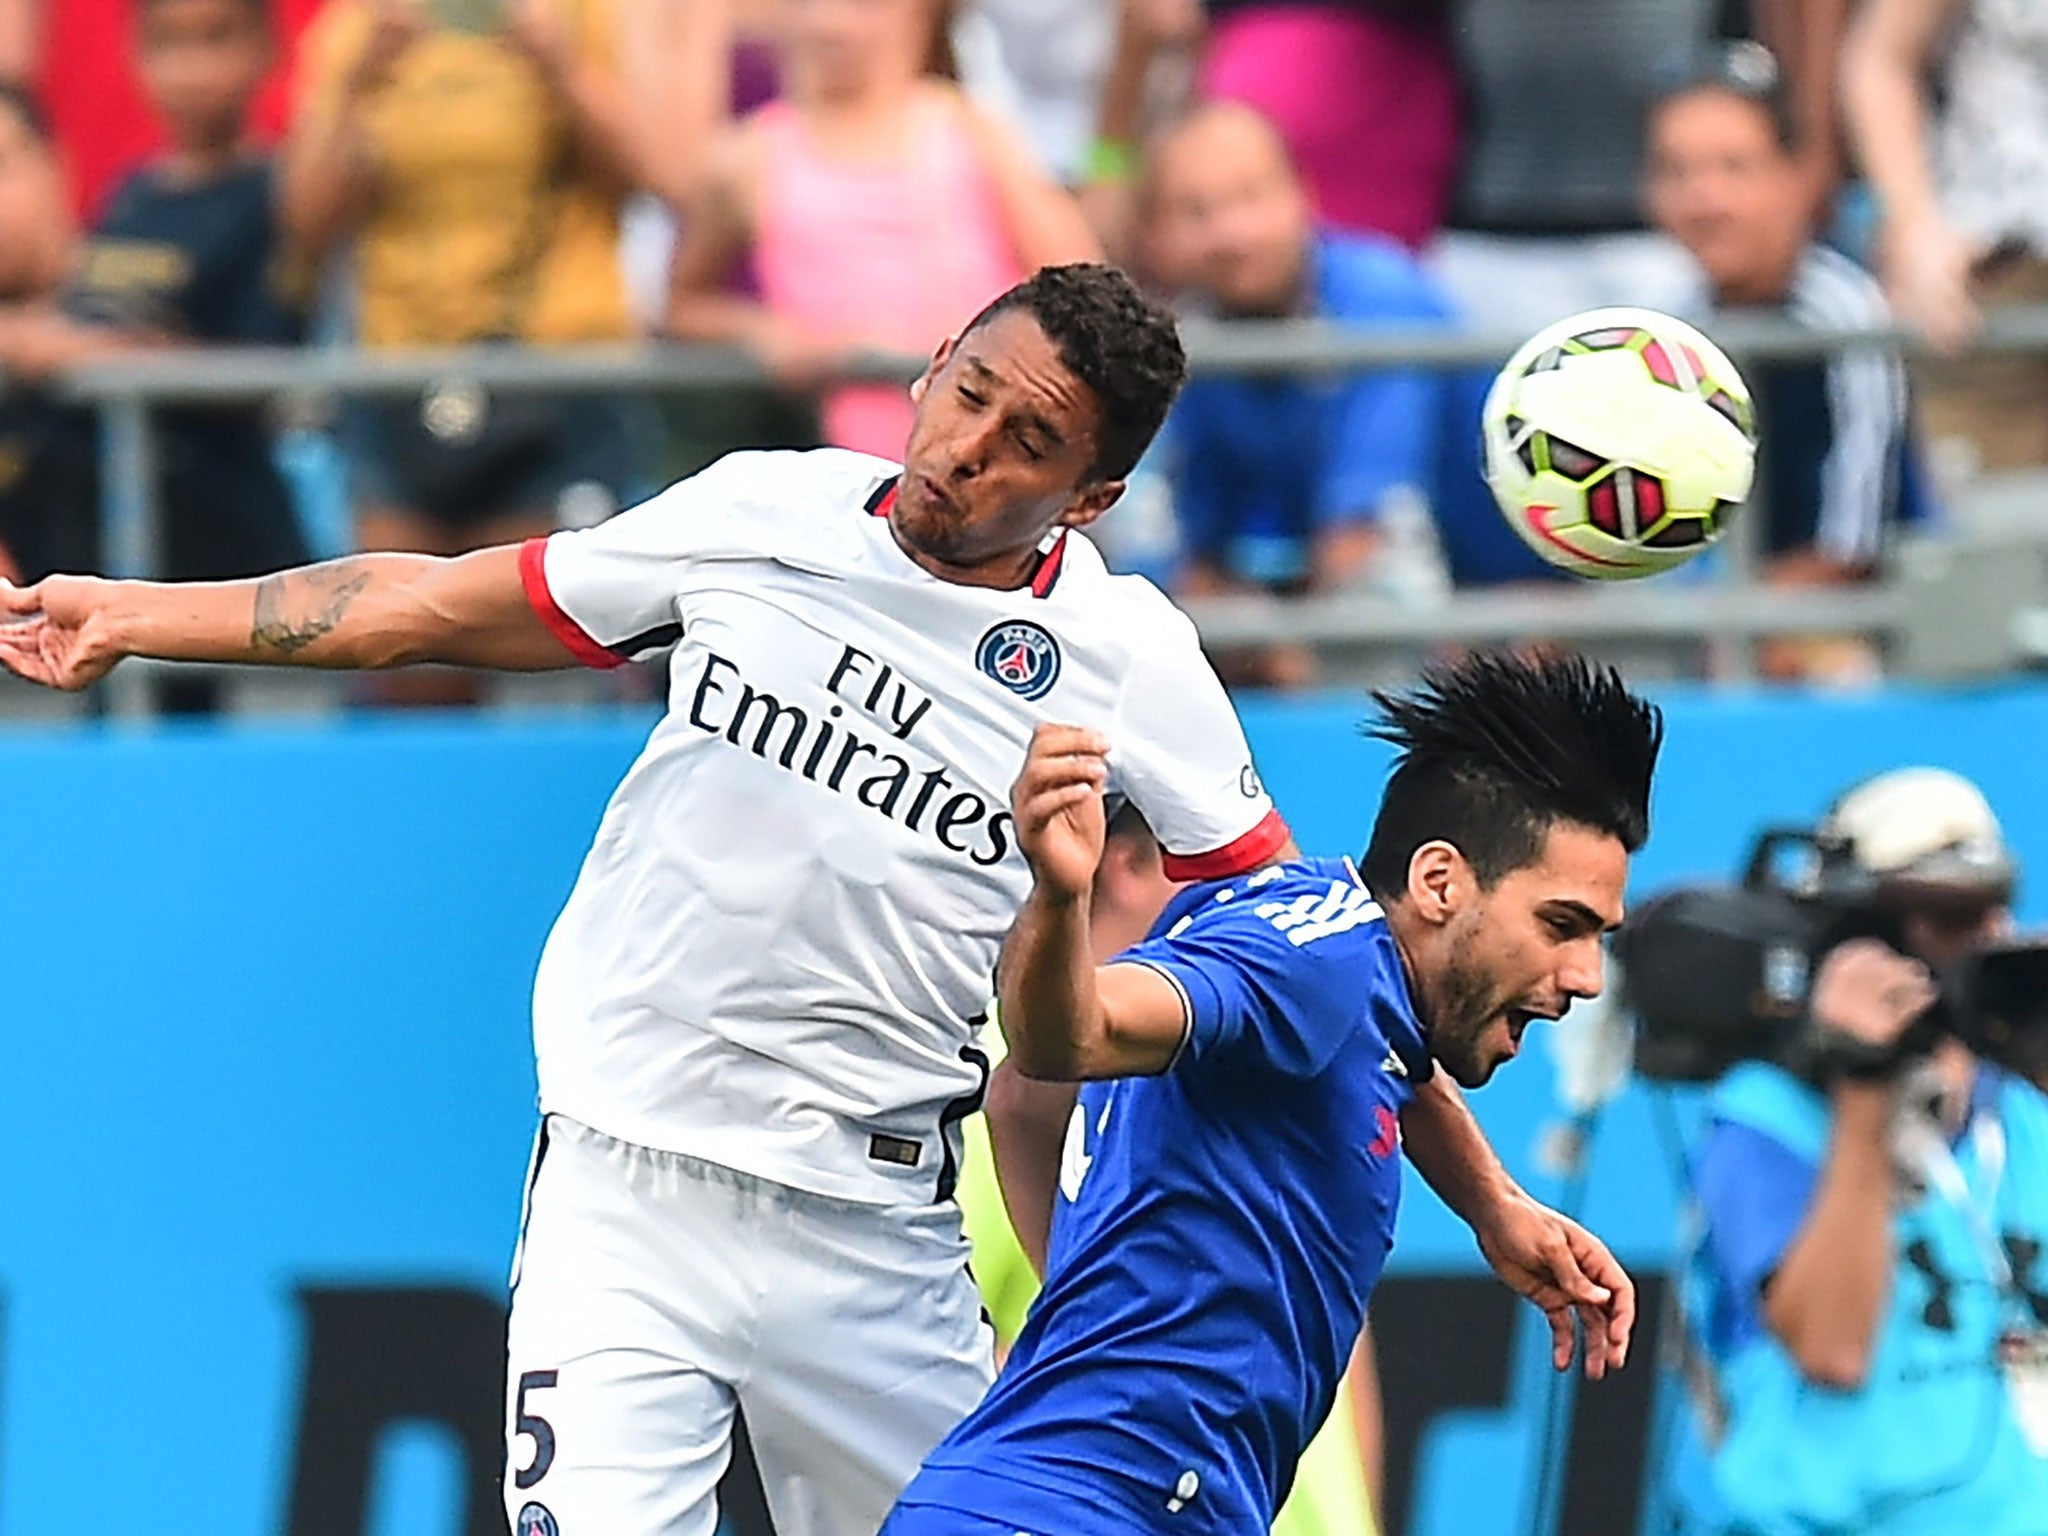 Radamel Falcao (right) challenges for the ball on his Chelsea debut last night